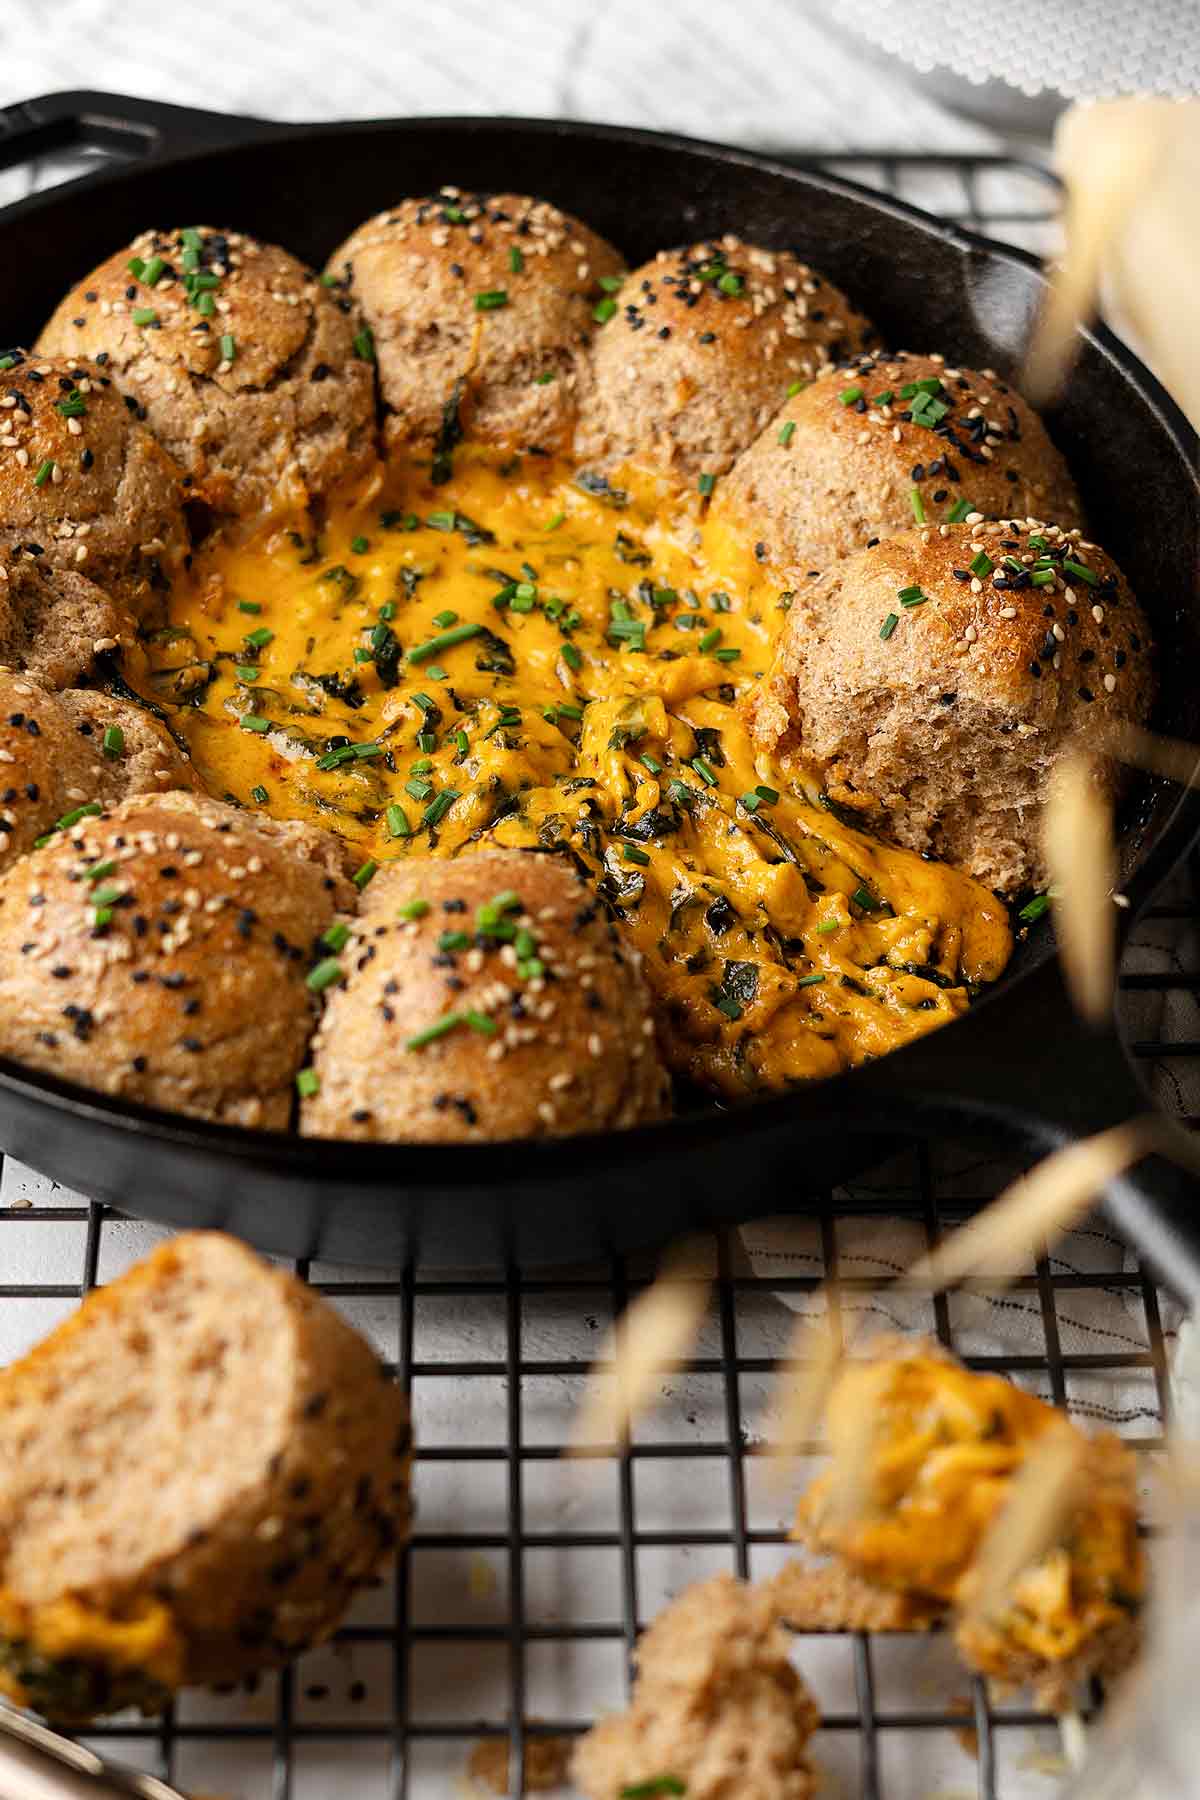 Cheese oozing out from skillet pull apart whole wheat buns